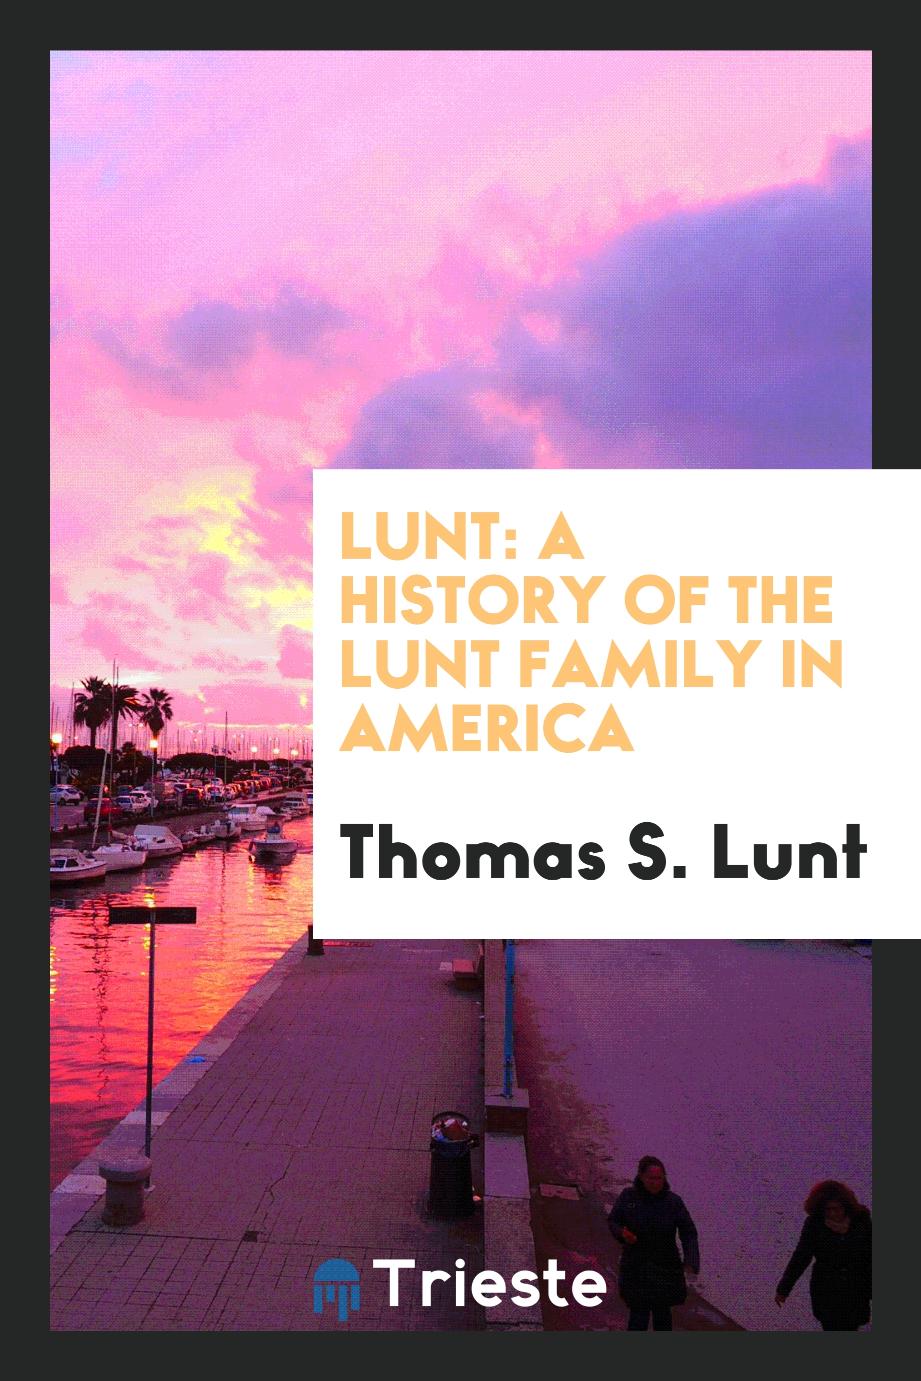 Lunt: A History of the Lunt Family in America